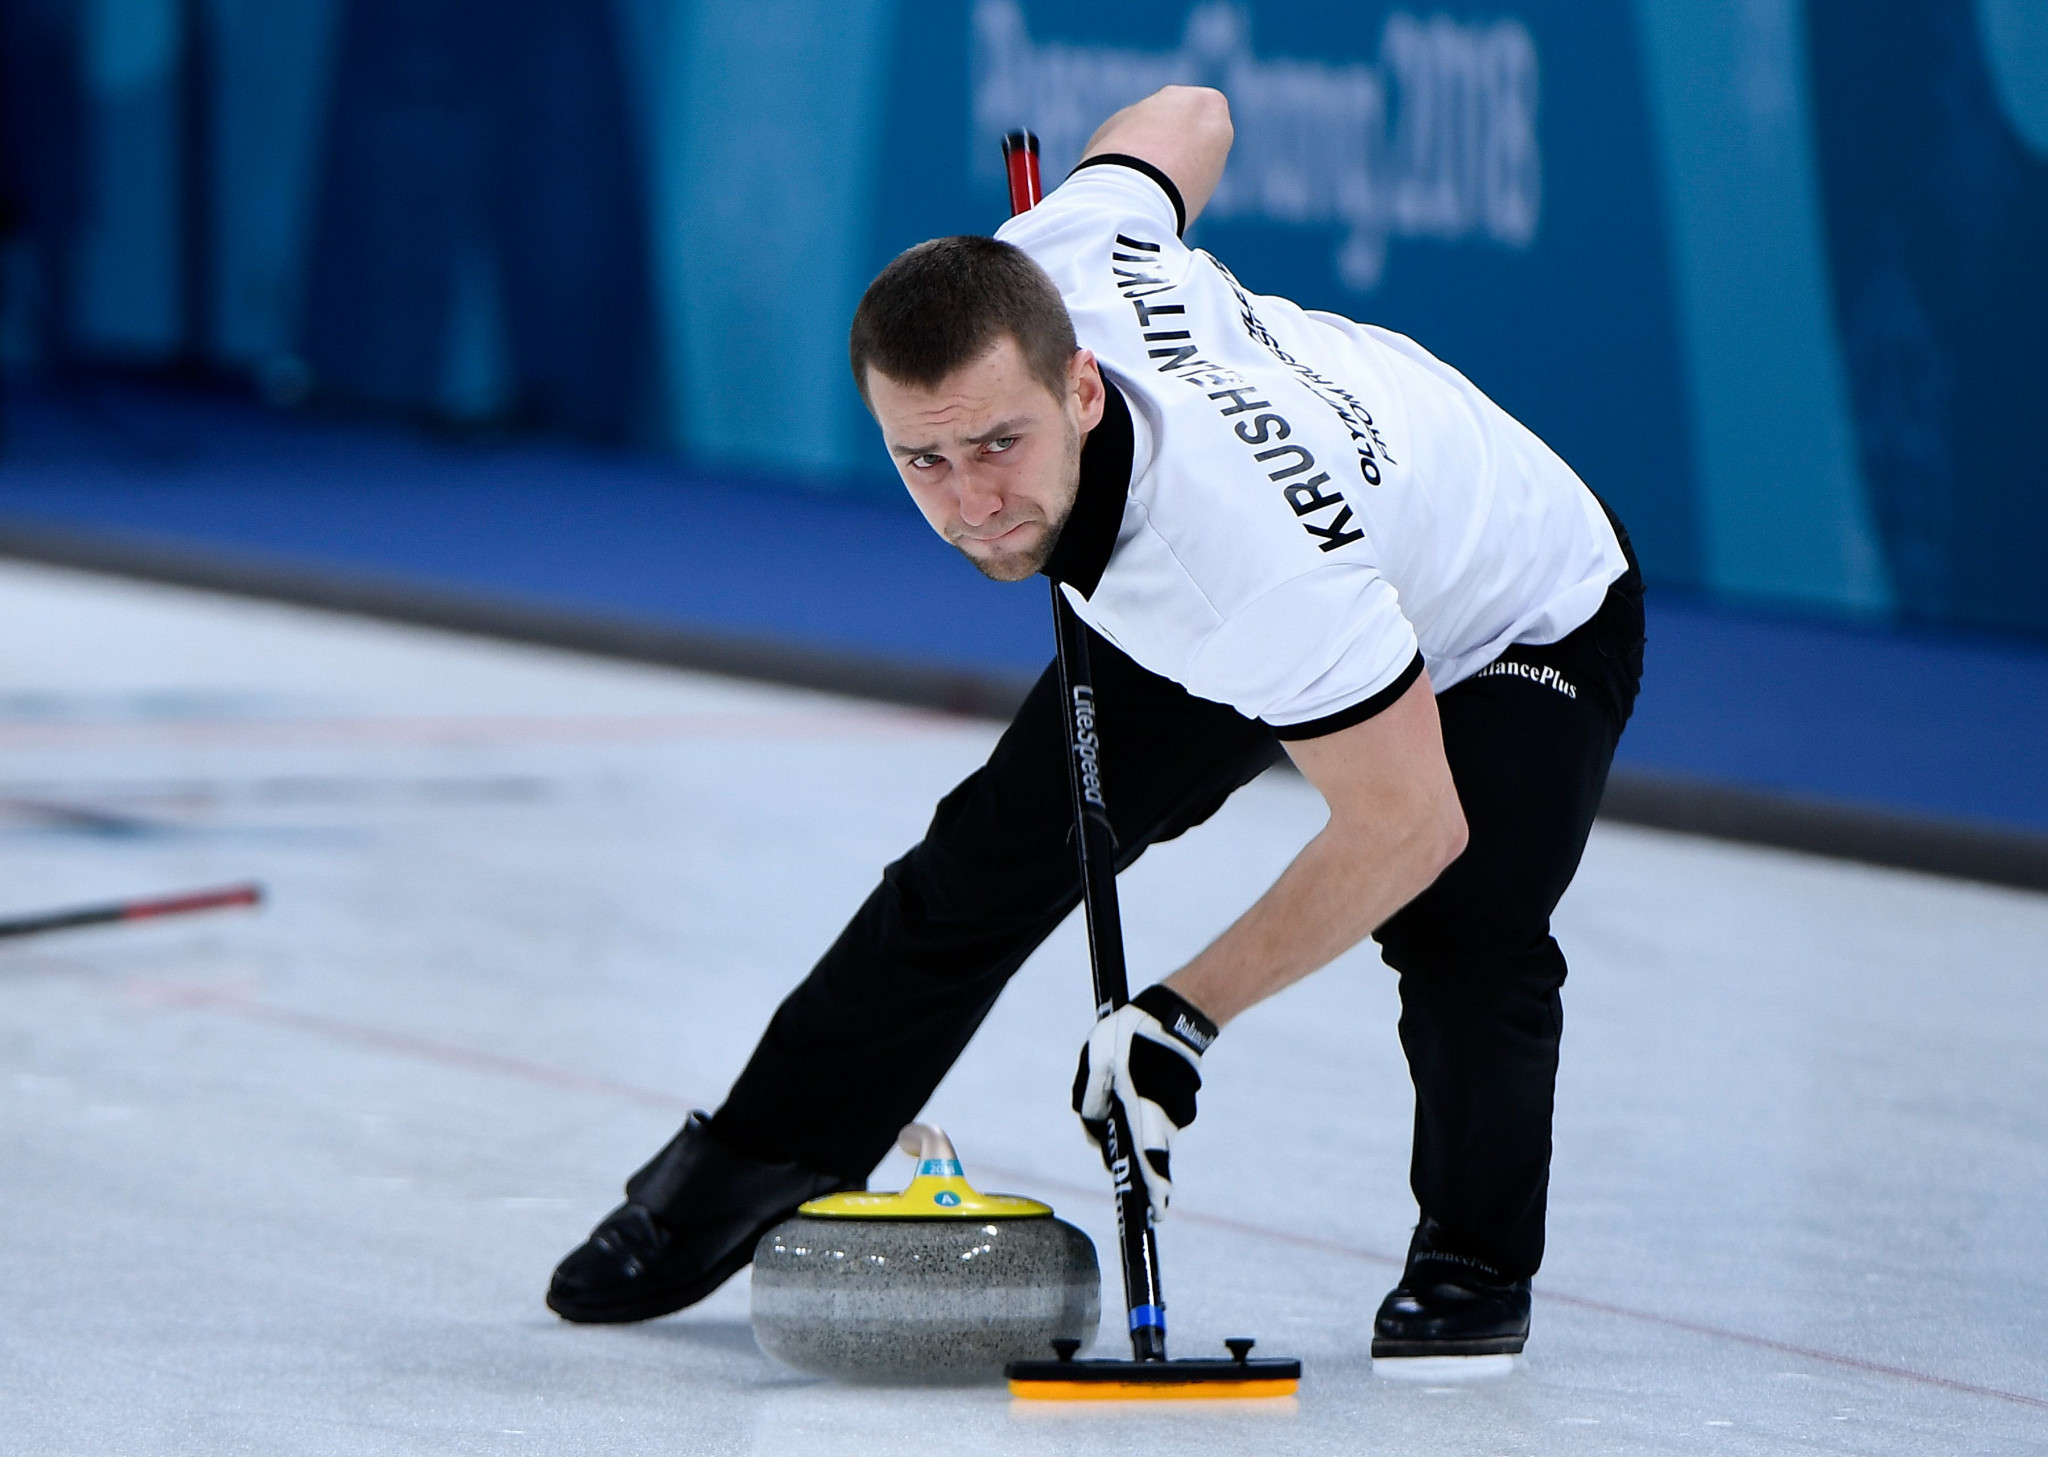 Russian curling doper set to return to the rink after Pyeongchang 2018 ban